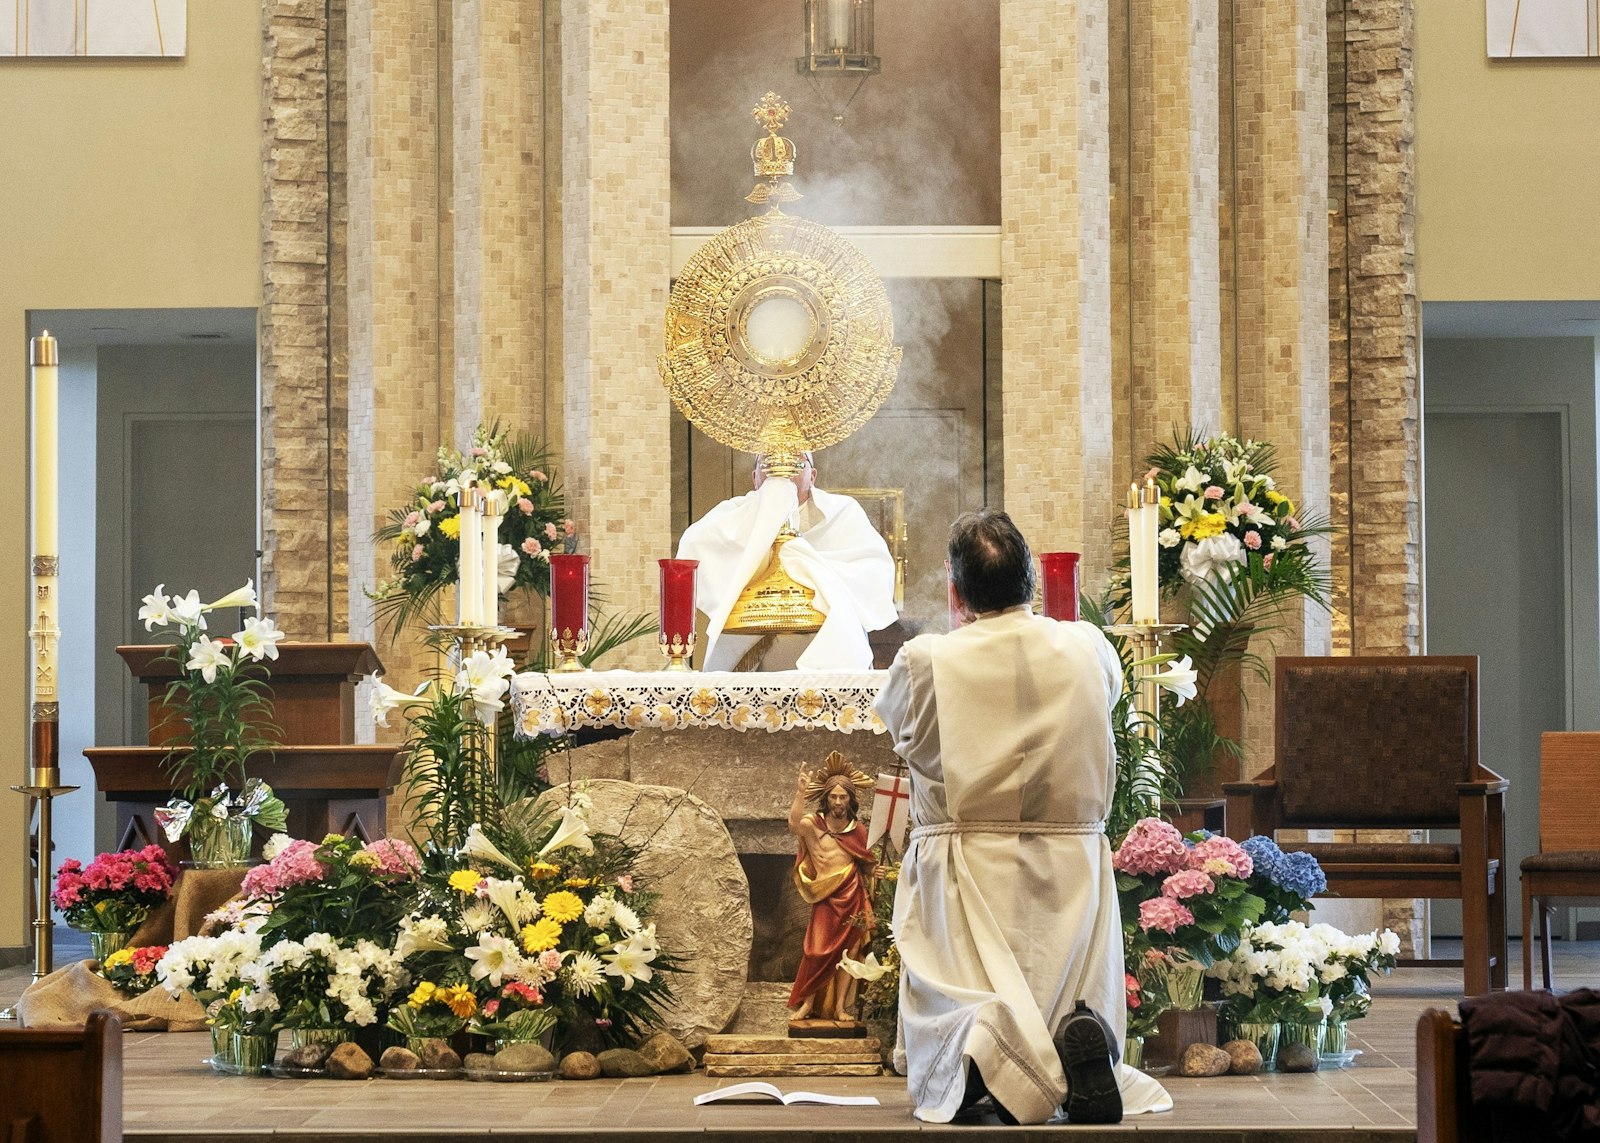 Catholics adore Jesus in the Blessed Sacrament, housed in a five-foot monstrance on the altar of St. Kieran Parish. Bishop Robert J. Fisher, moderator of the Archdiocese of Detroit's Northeast Region, celebrated Mass for attendees.